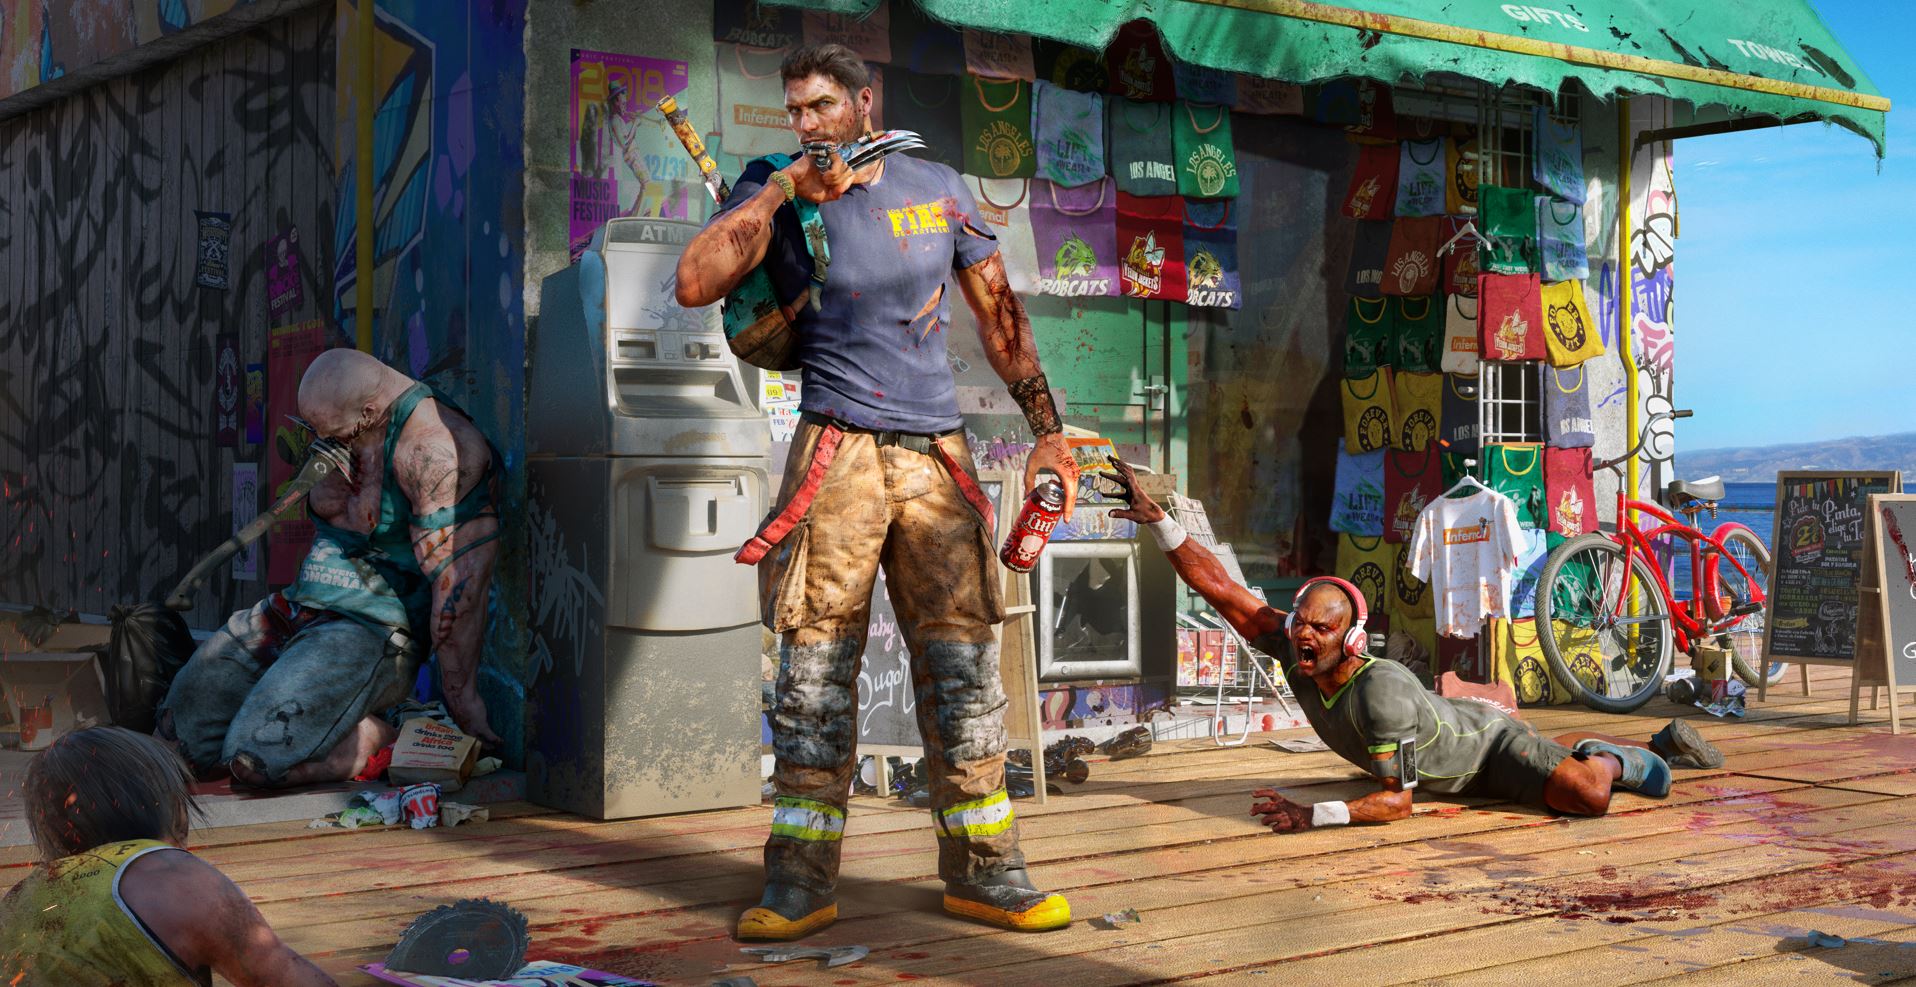 Dead Island 2 review: gore, what is it good for?